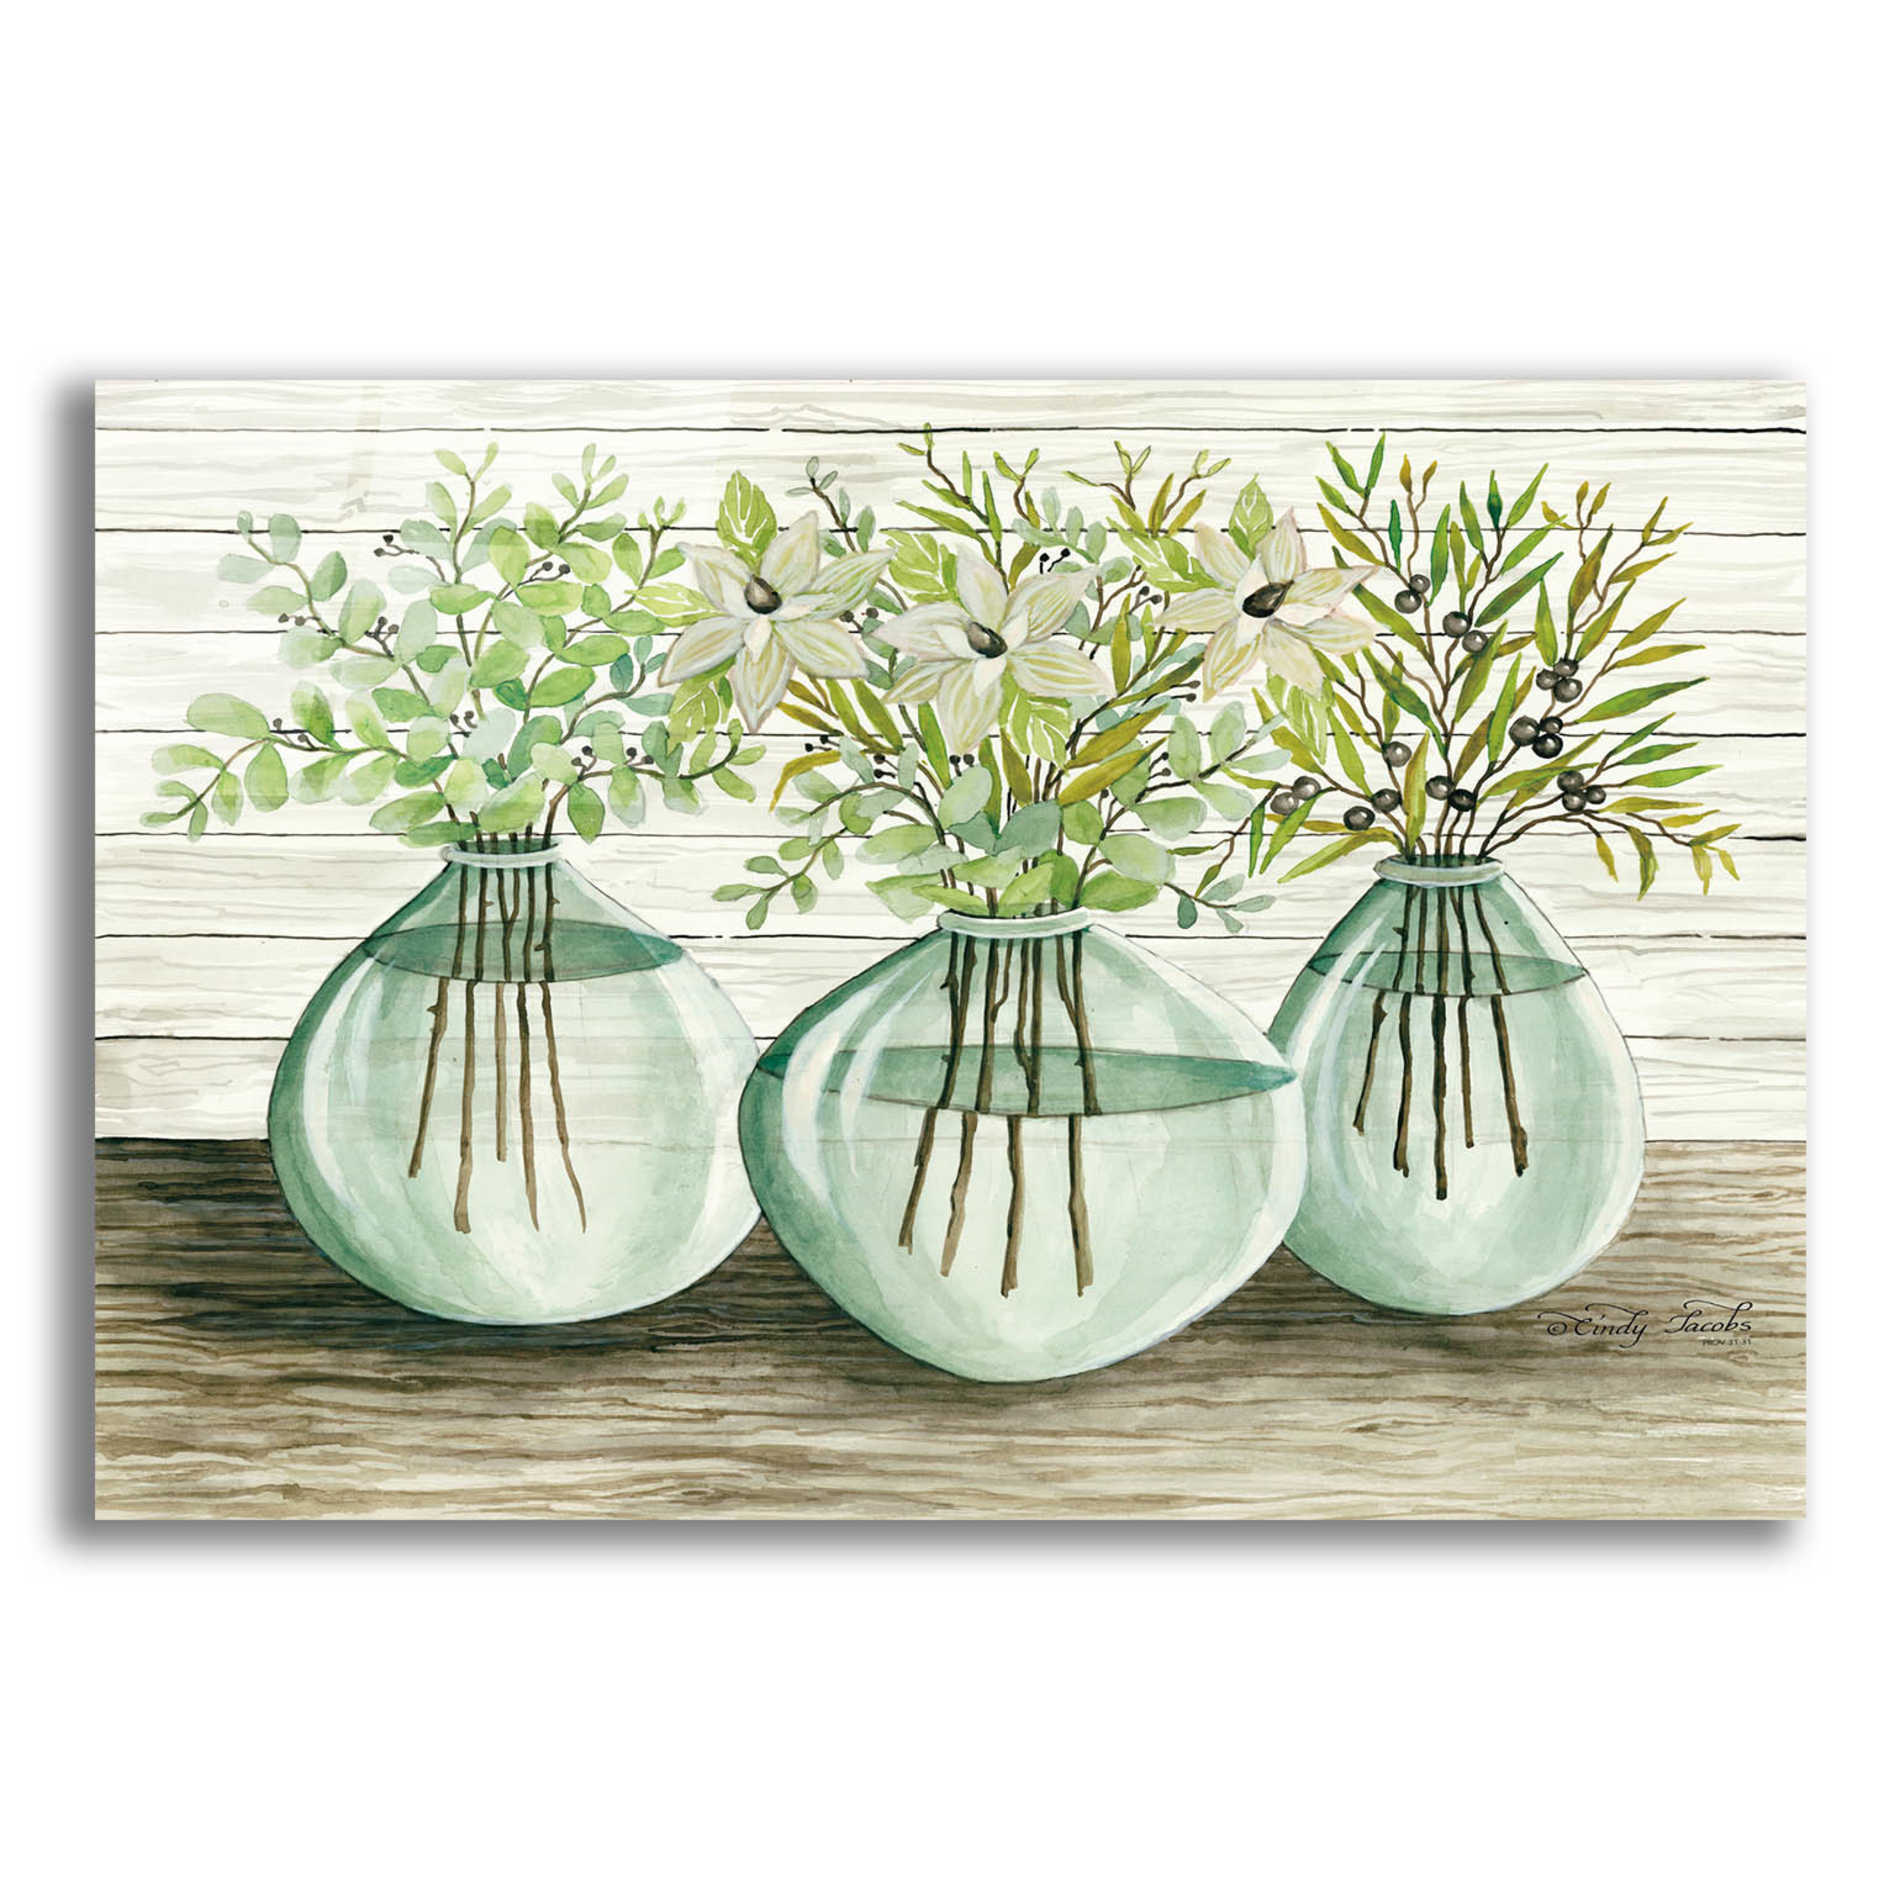 Epic Art 'Eucalyptus in Glass Vases' by Cindy Jacobs, Acrylic Glass Wall Art,16x12